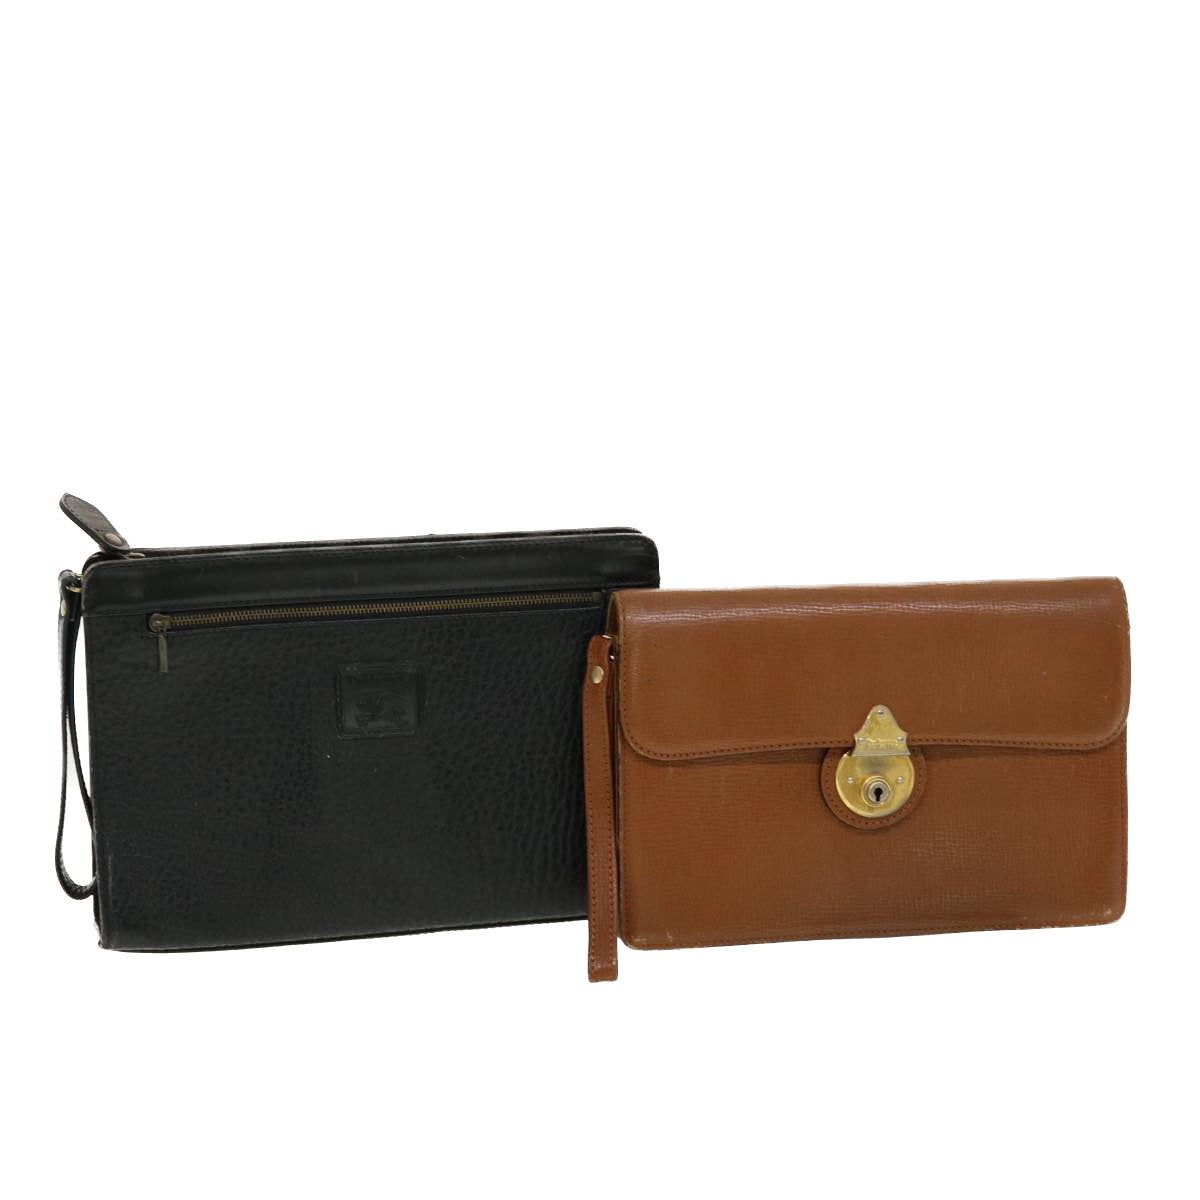 Burberrys Clutch Bag Leather 2Set Black Brown Auth bs5495